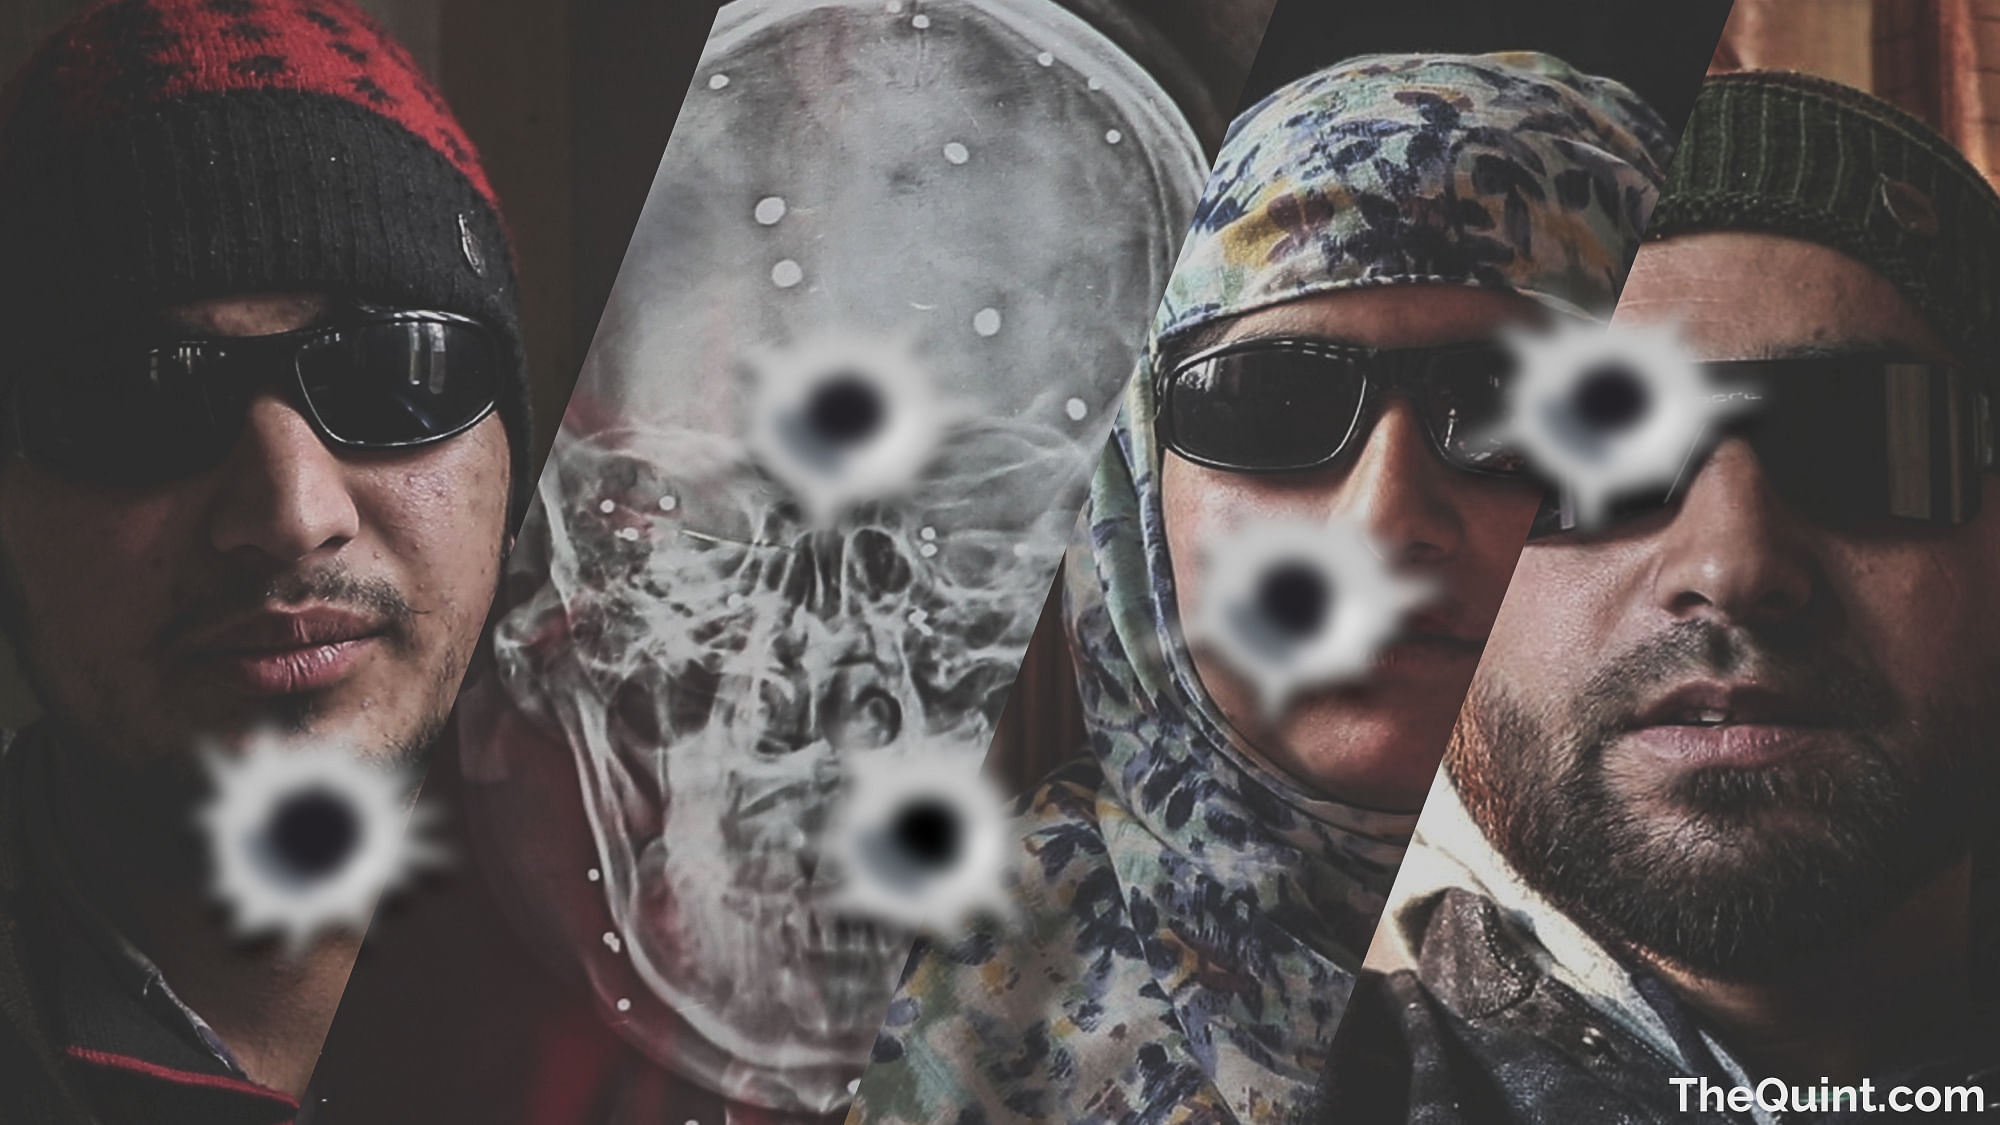 <b>

The Quint </b>spoke to three pellet victims in Kashmir who lost their vision.&nbsp;  (Photo: Altered by <b>The Quint</b>/Harsh Sahani)